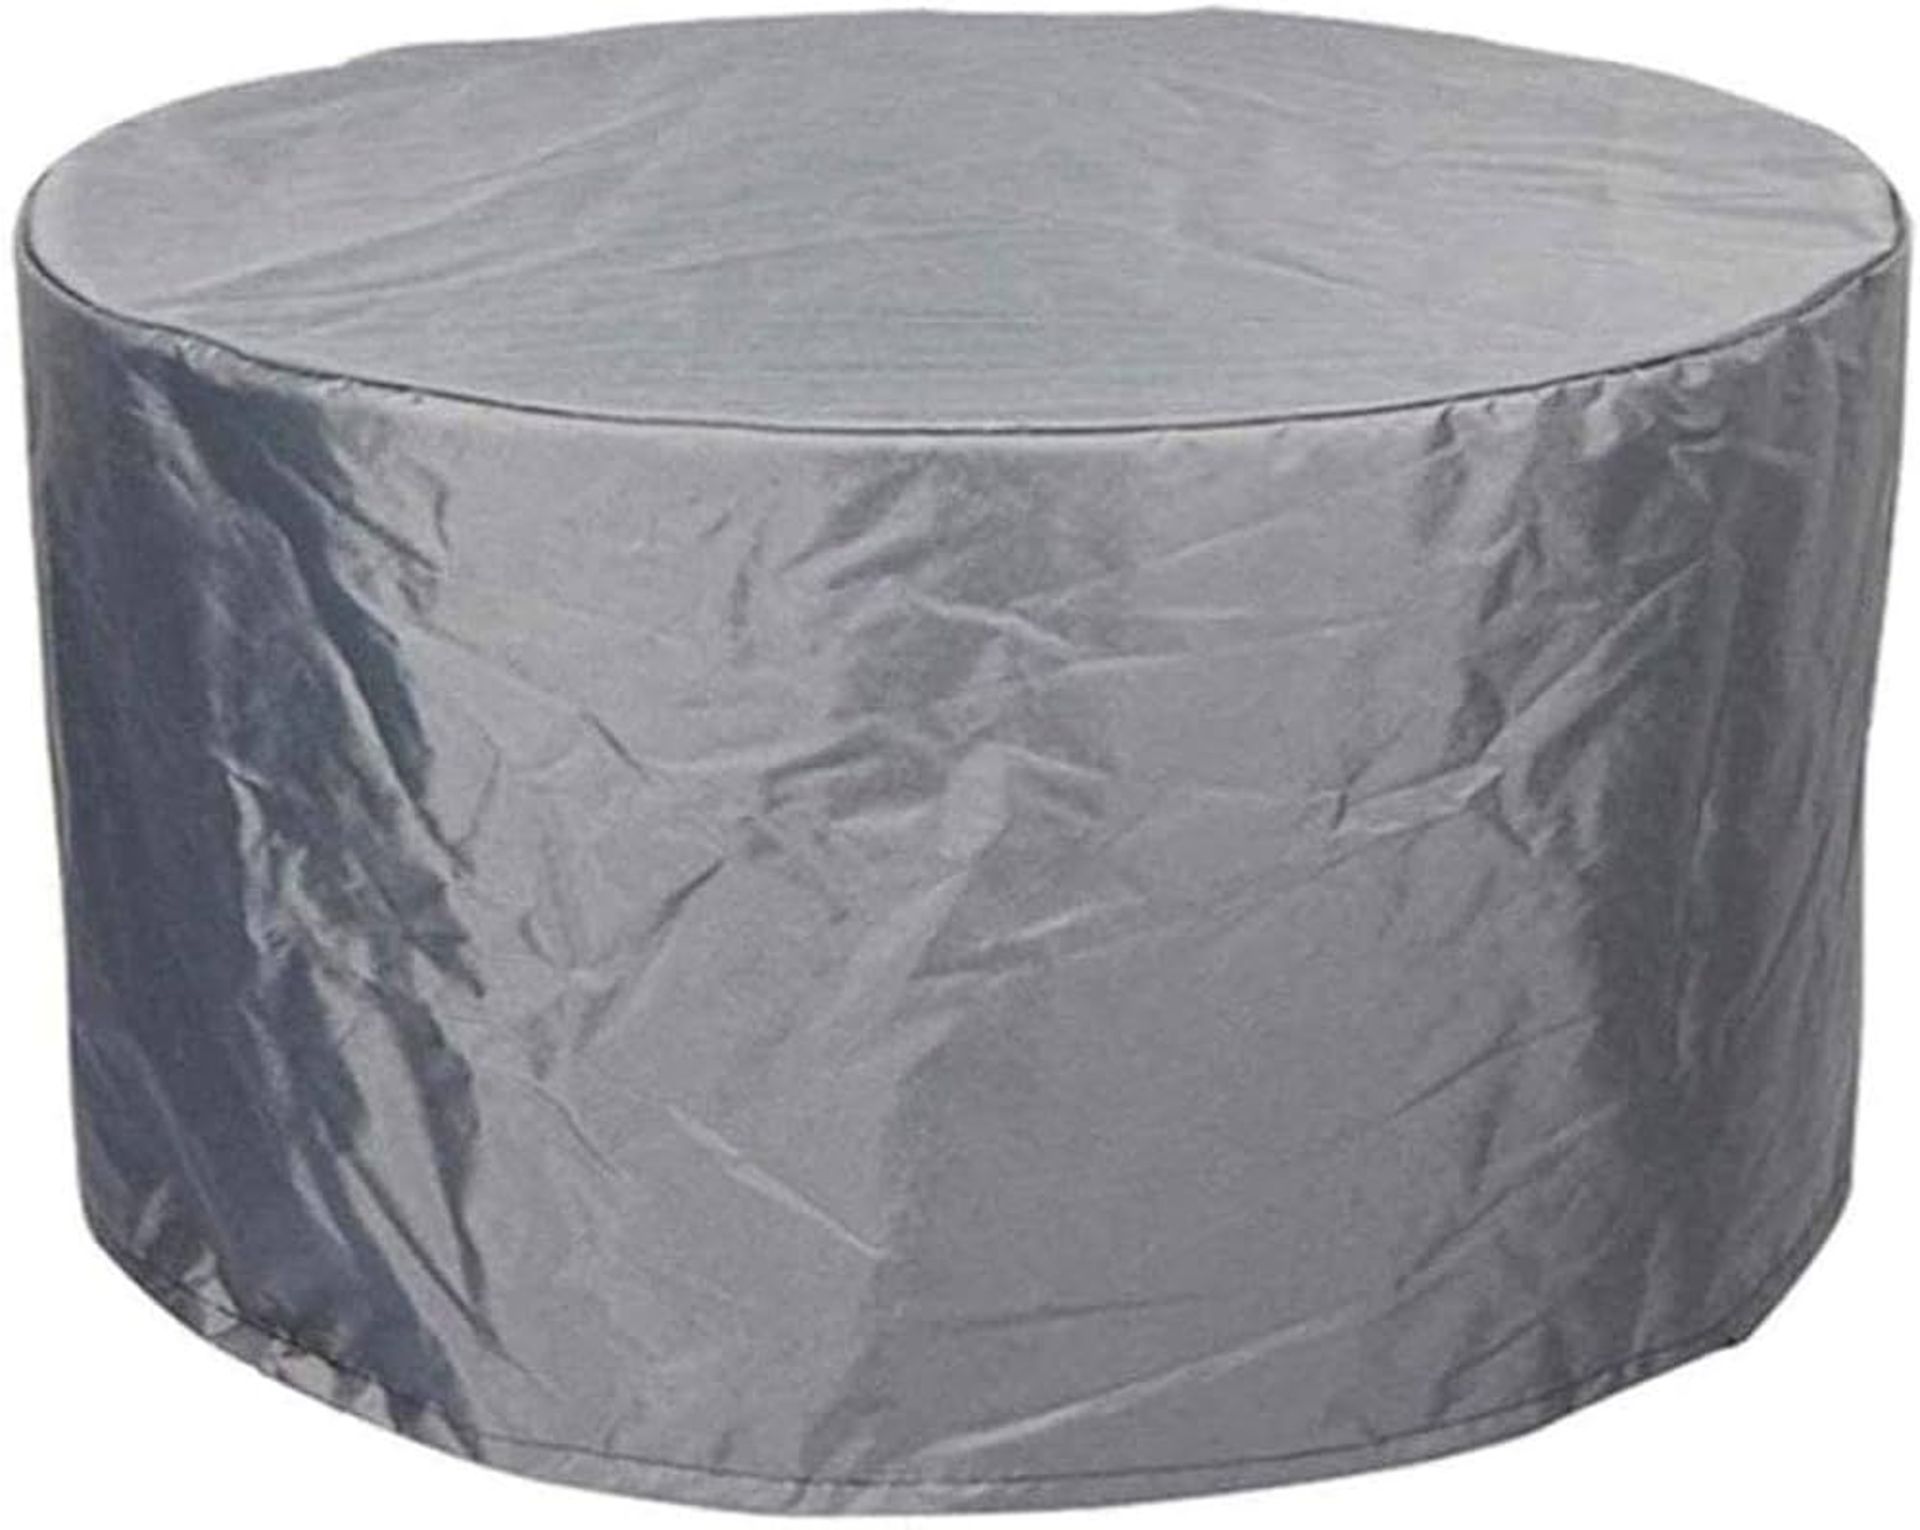 PALLET CONTAINING 100 X MEDIUM GREY ROUND OUTDOOR FURNITURE COVER + 4 X POP UB BALL TENTS